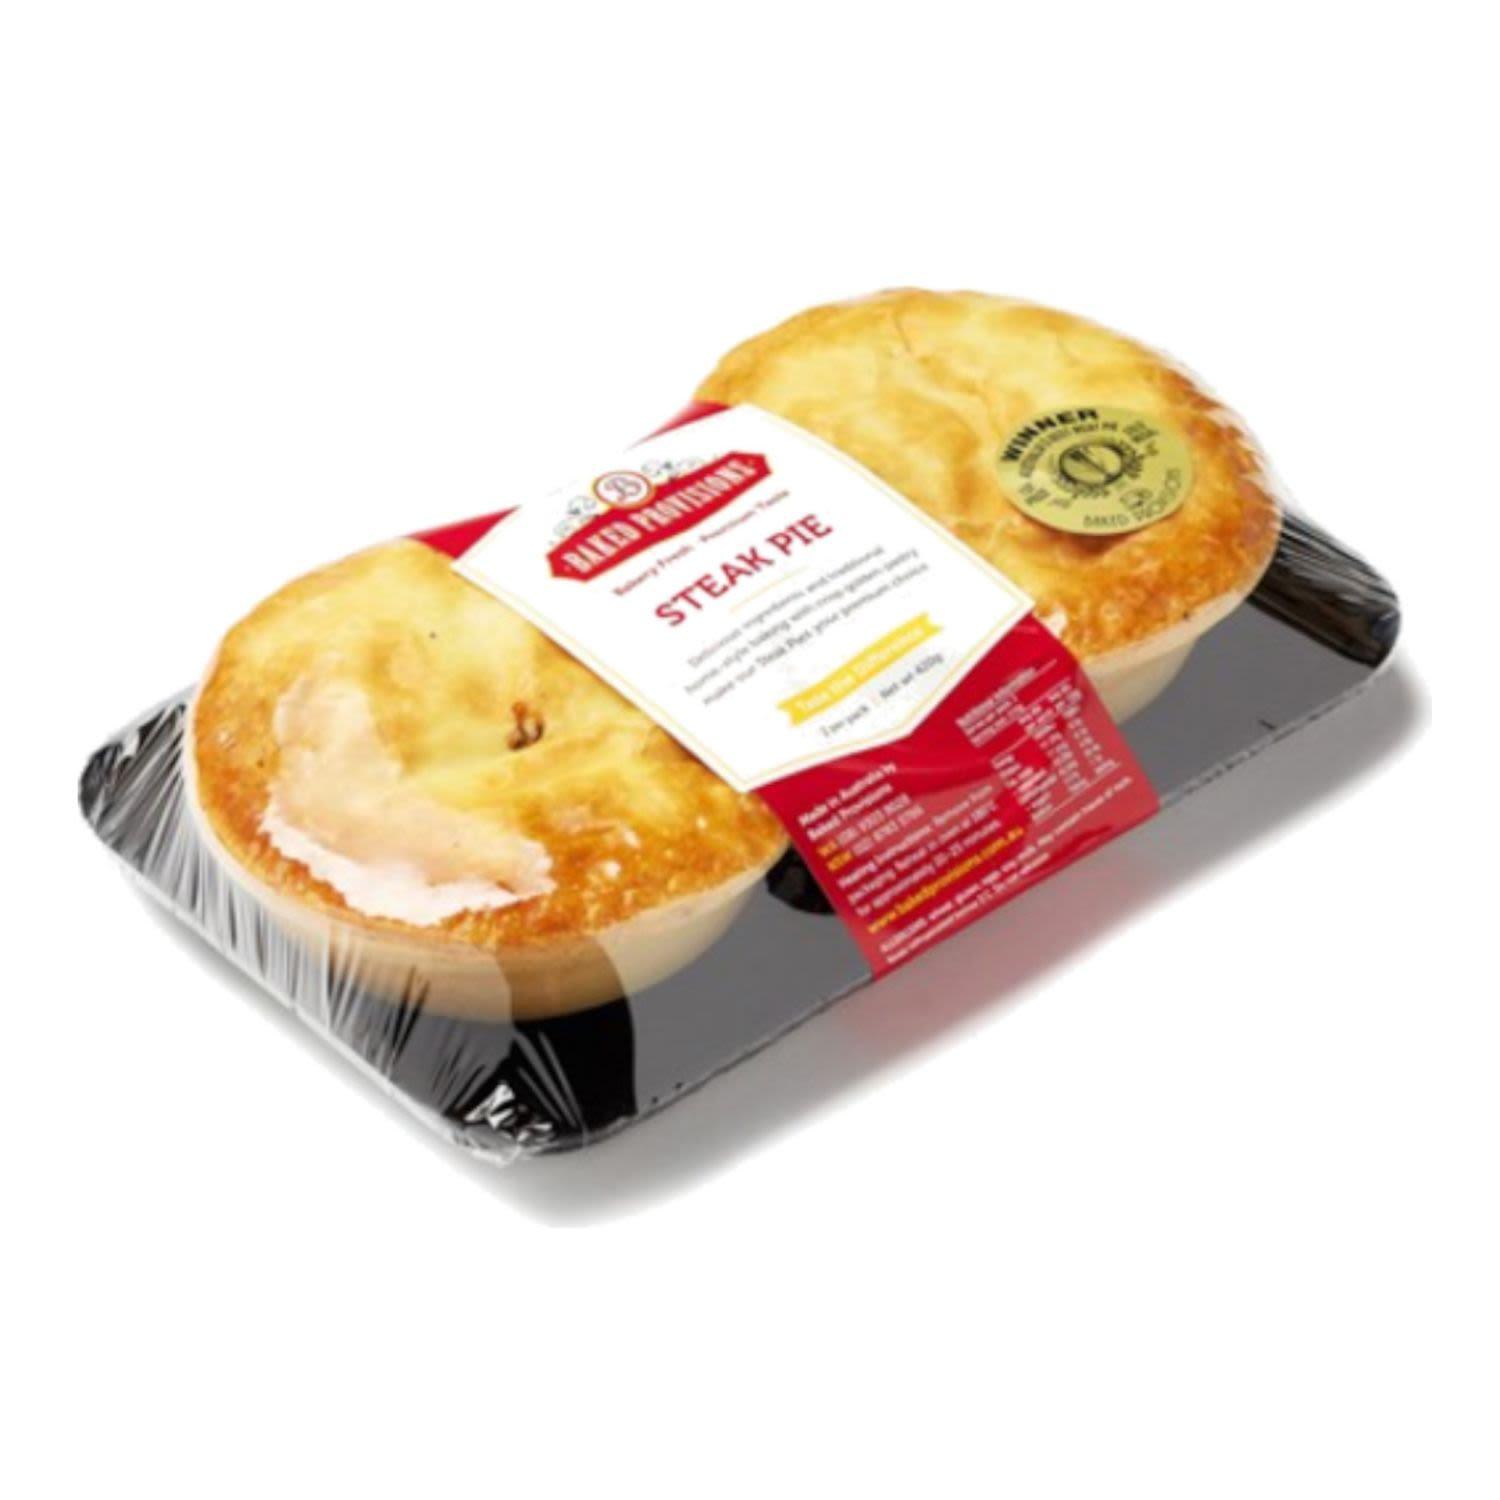 Baked Provisions Steak Pie (2 Pack) 420g